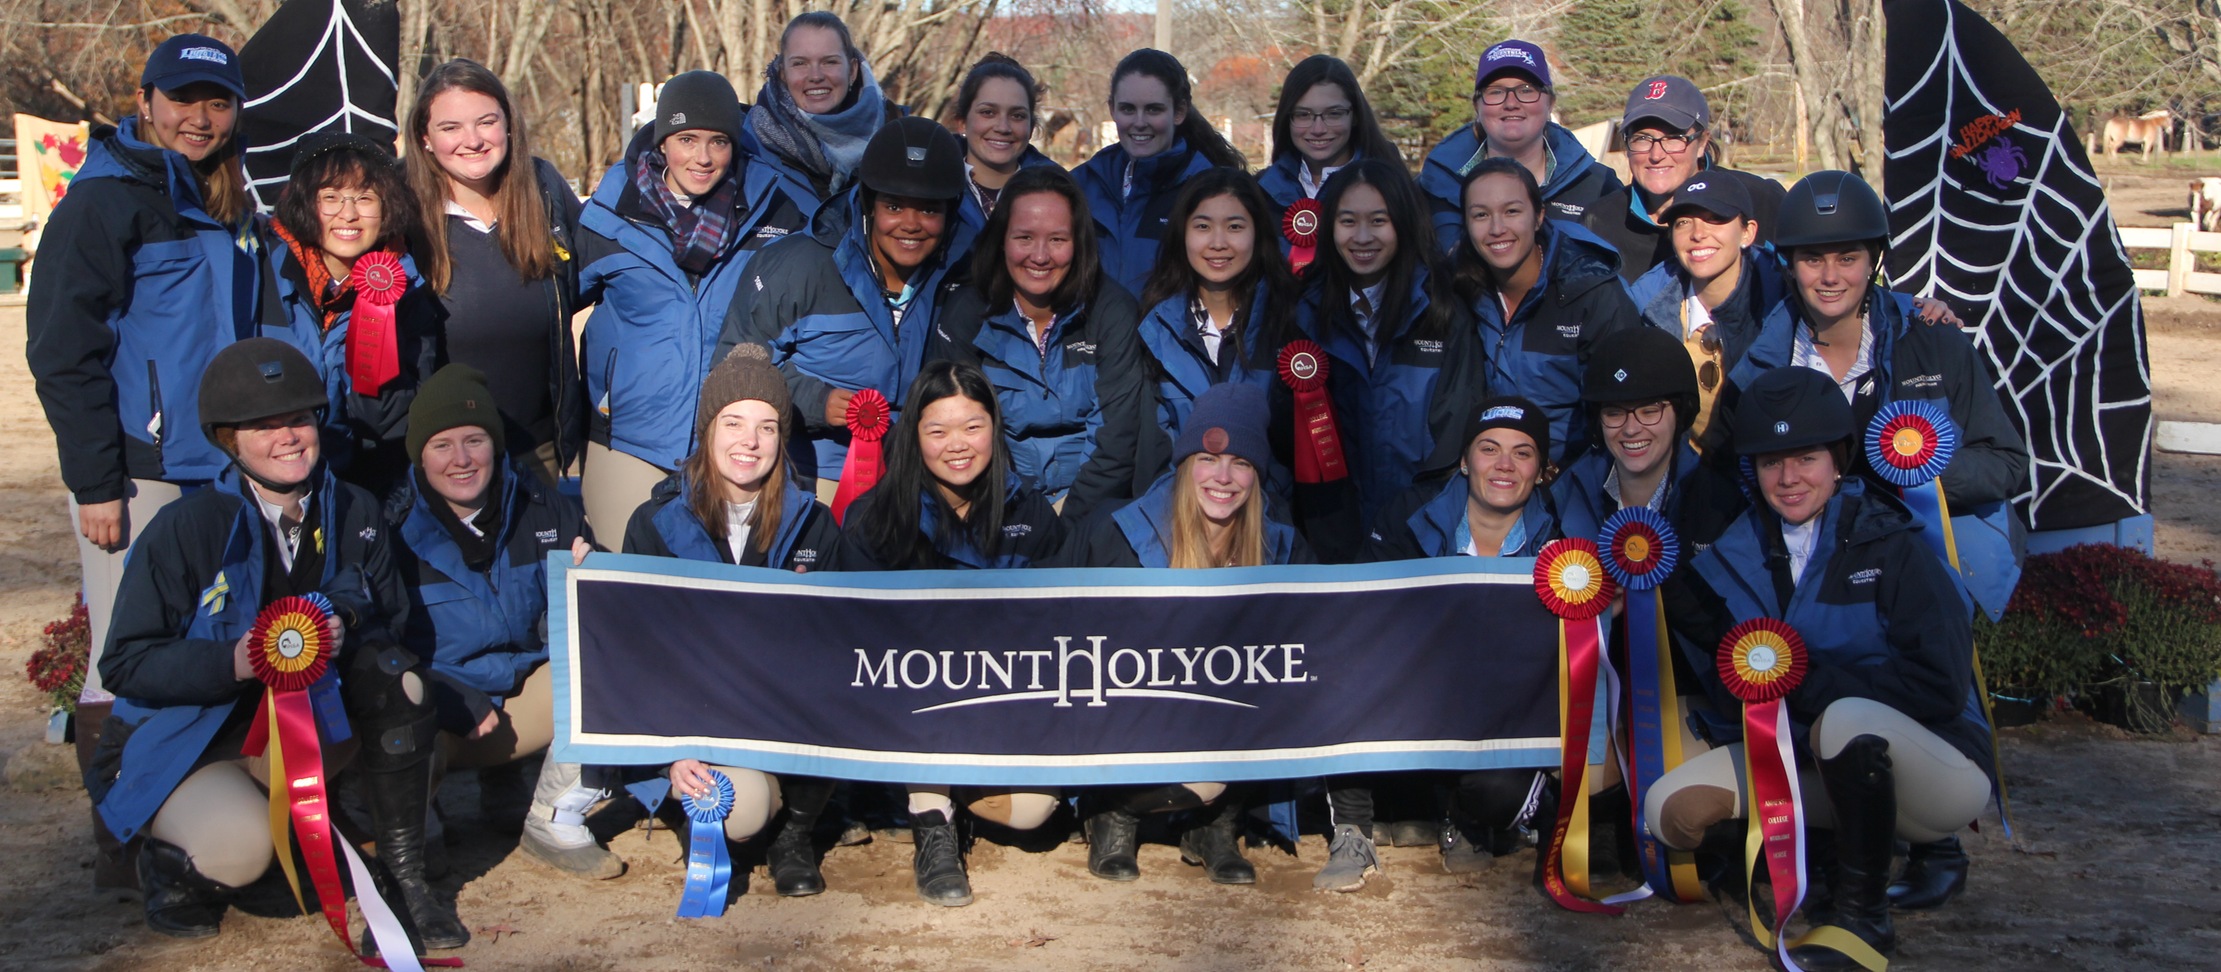 Riding Earns Reserve High Point College Title at Amherst College Show